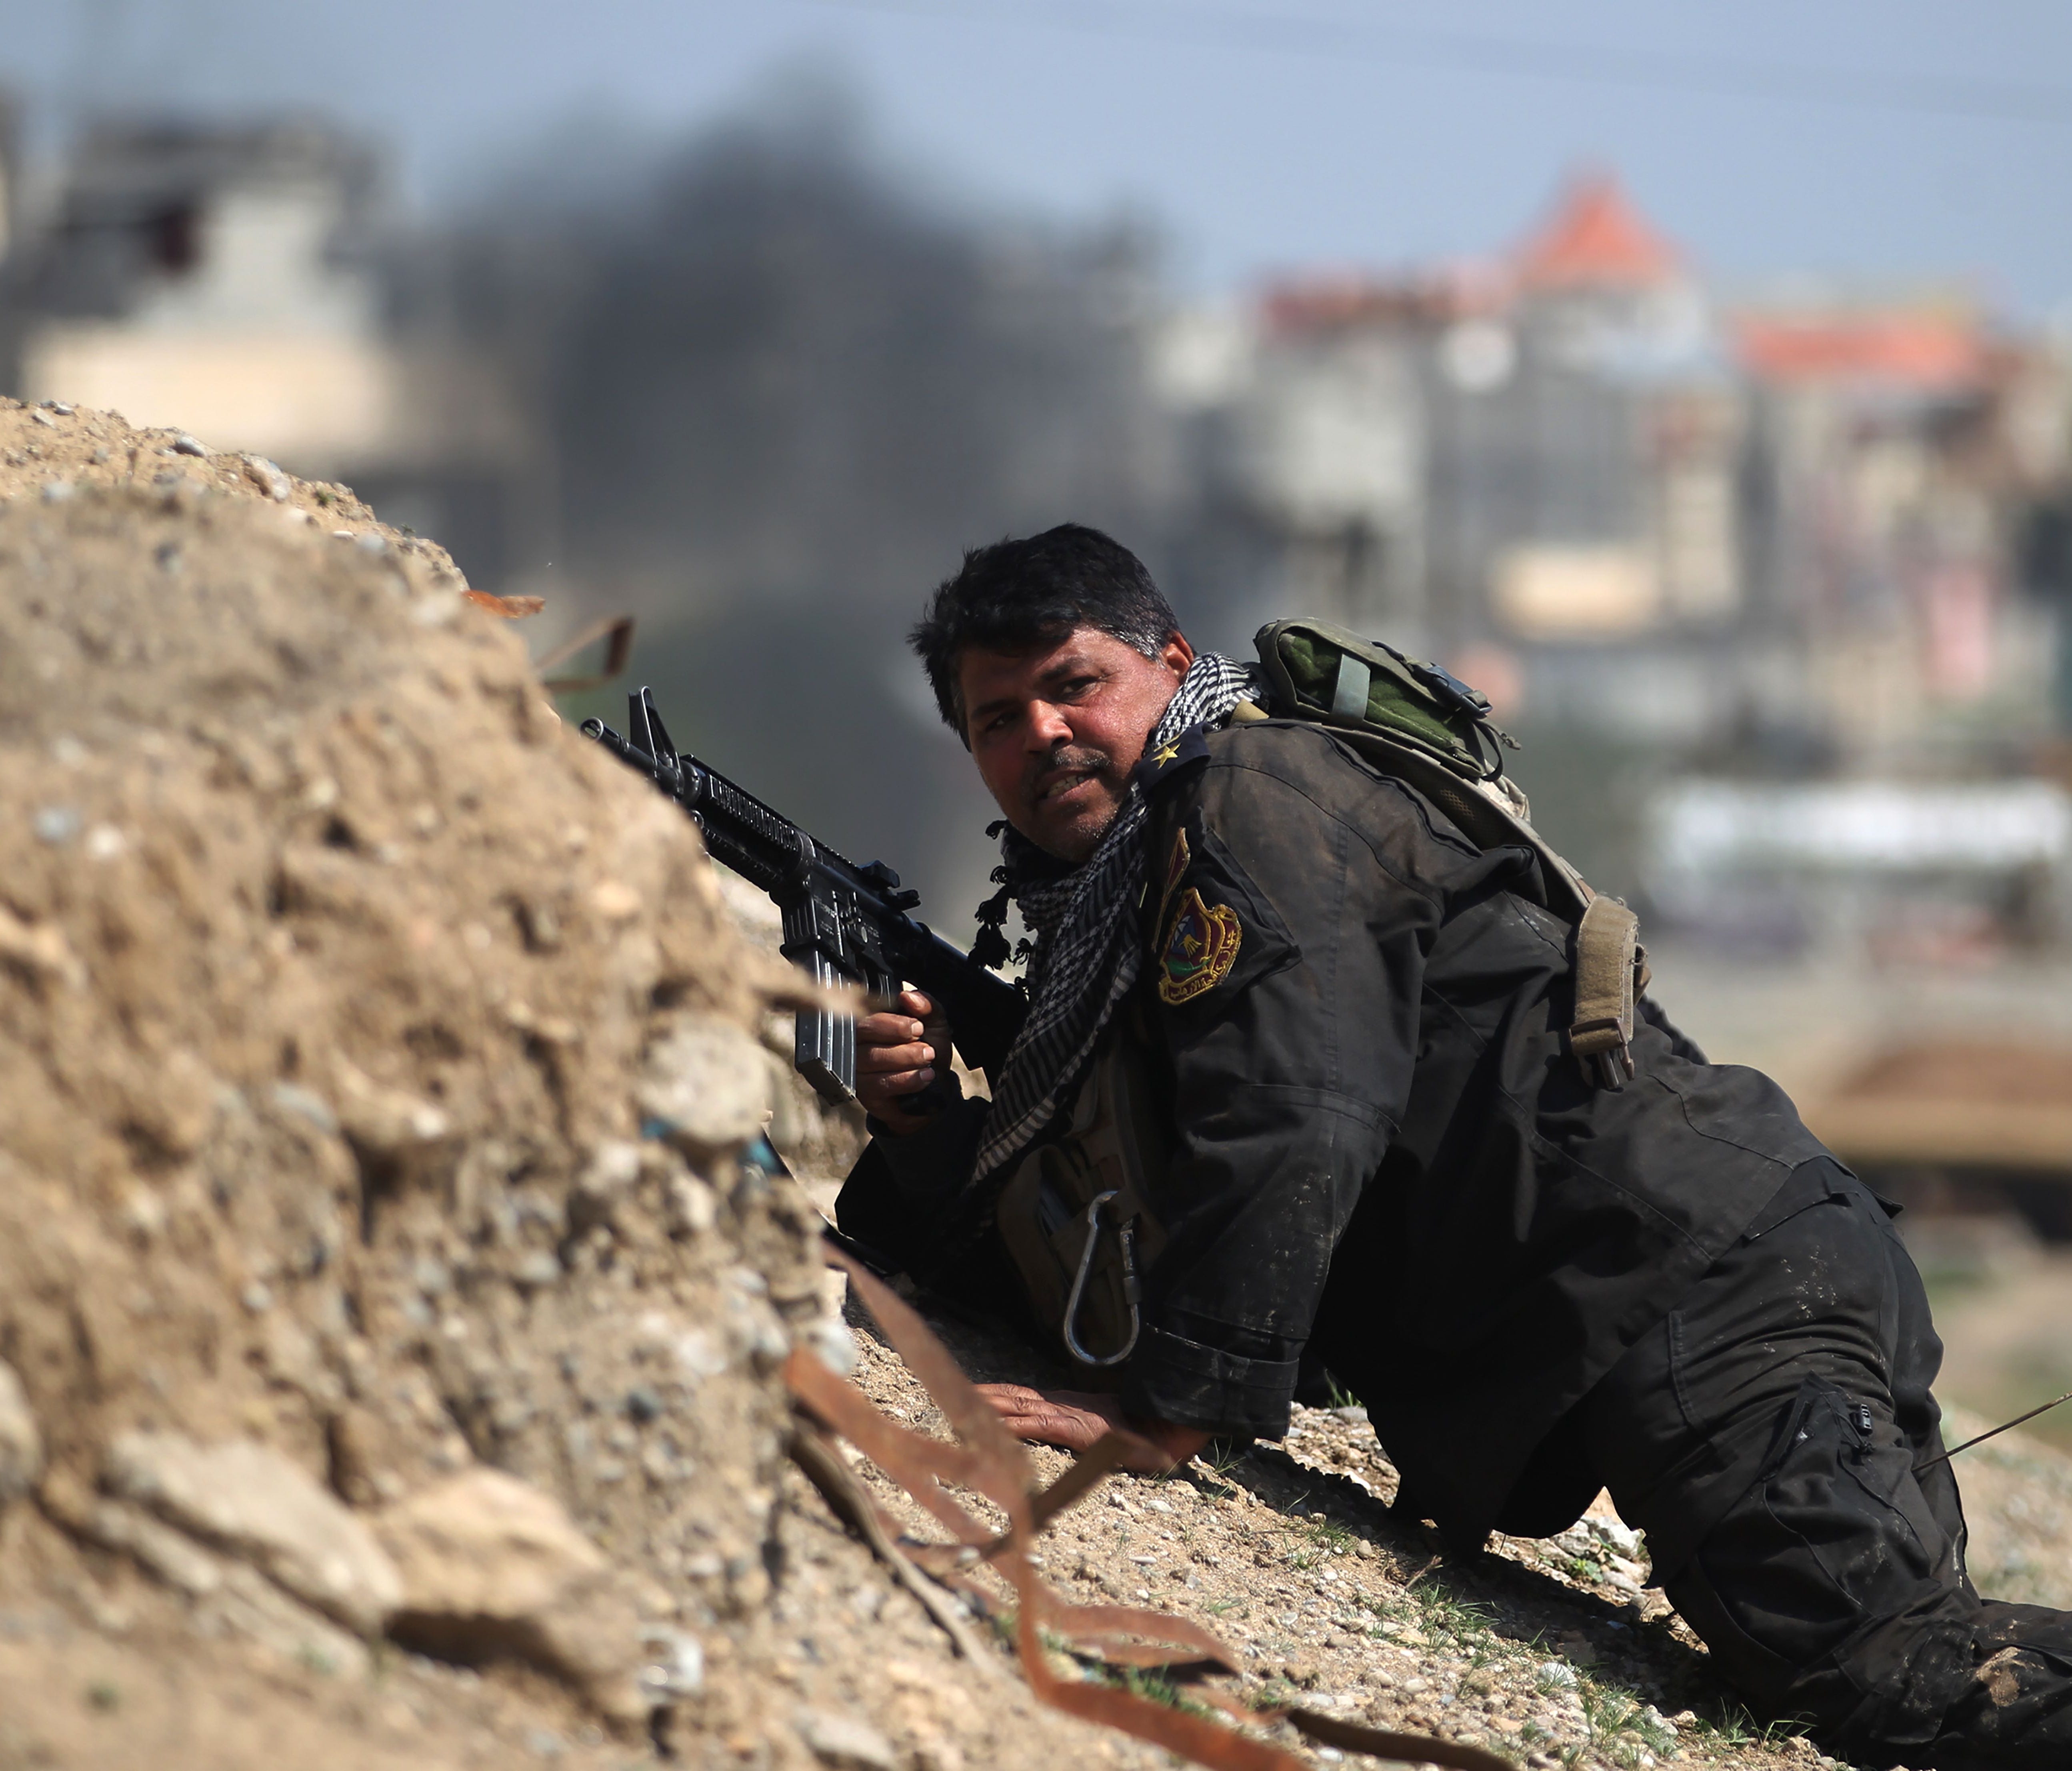 A member of Iraq's elite Counter-Terrorism Service takes cover as they advance toward Mosul's Nasser neighborhood on March 14, 2017 during the ongoing offensive to retake the city from Islamic State militants.